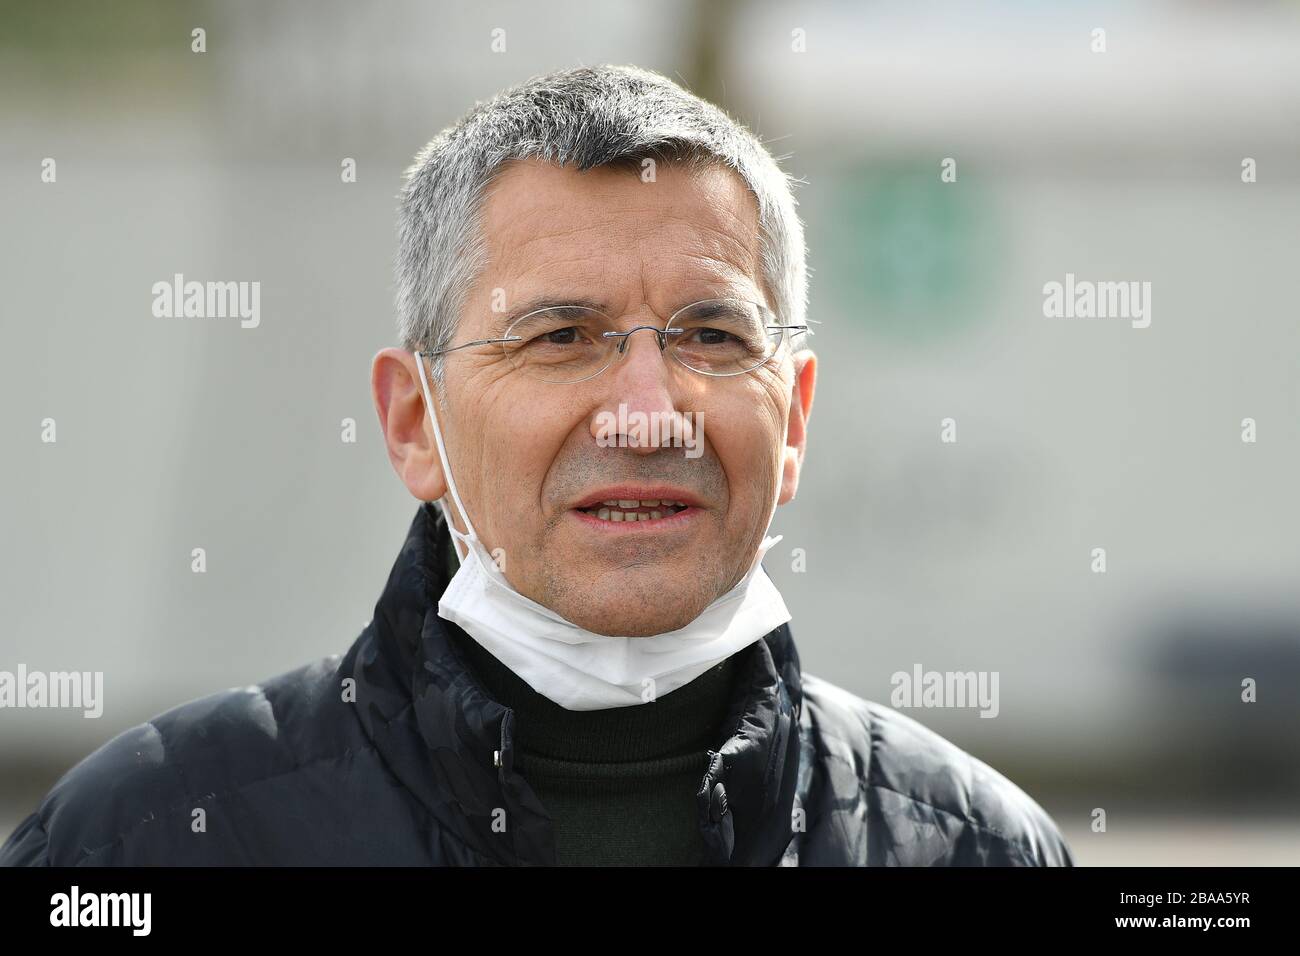 Herbert HAINER (President FC Bayern Munich) wears a face mask, protective mask. Single picture, cut single motif, portrait, portrait, portrait. FC Bayern Munich Basketball is helping the Muenchener Tafel on 26.03.2020 in the wholesale market in Muenchen. @Sven Simon Photo Agency. GmbH & Co. Press Photo KG # Prinzess-Luise-Str. 41 # 45479 M uelheim/R uhr # Tel. 0208/9413250 # Fax. 0208/9413260 # GLS Bank # BLZ 430 609 67 # Kto. 4030 025 100 # IBAN DE75 4306 0967 4030 0251 00 # BIC GENODEM1GLS # www.svensimon.net. | usage worldwide Stock Photo